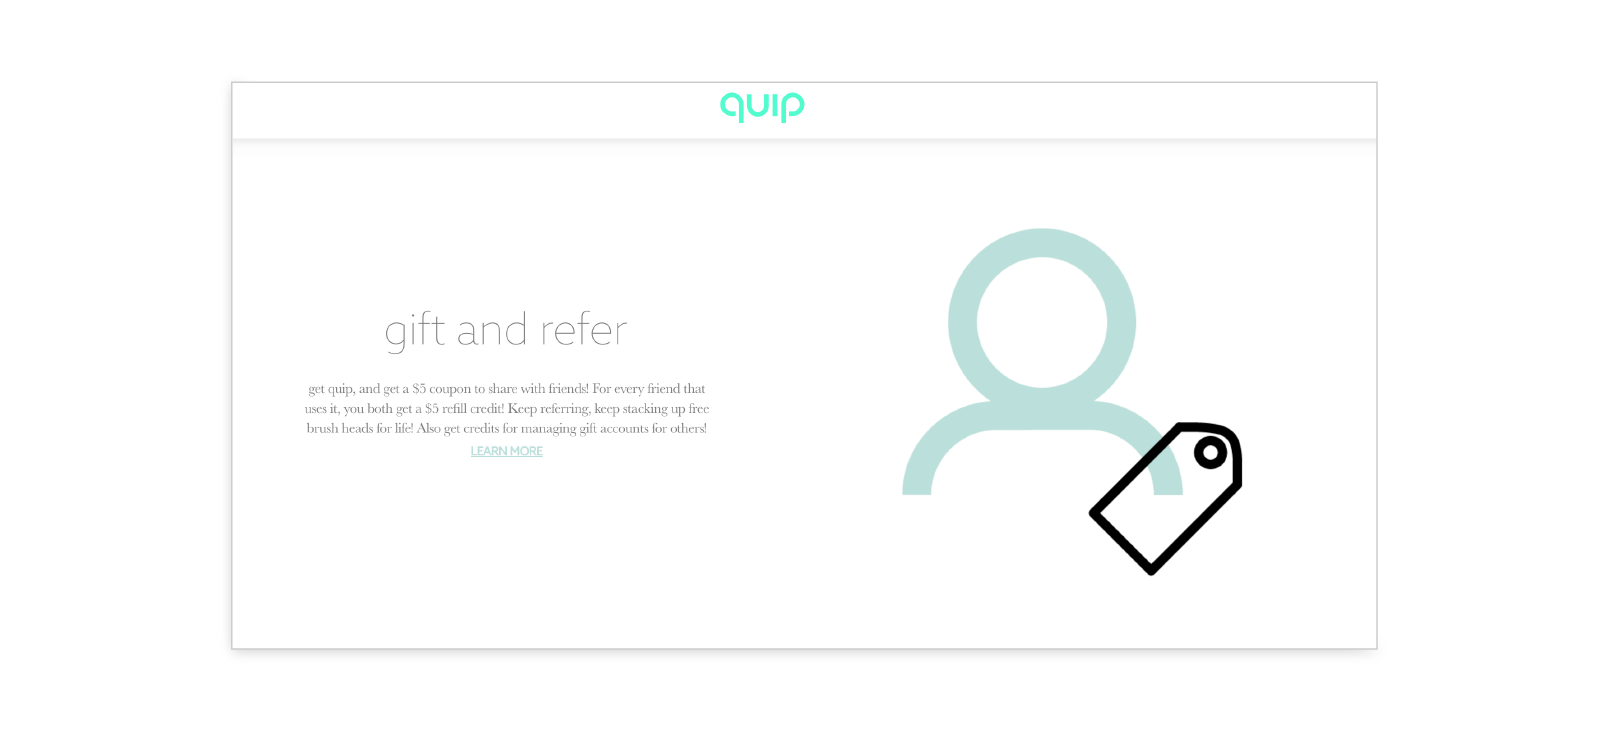 quip coupon credit referral example